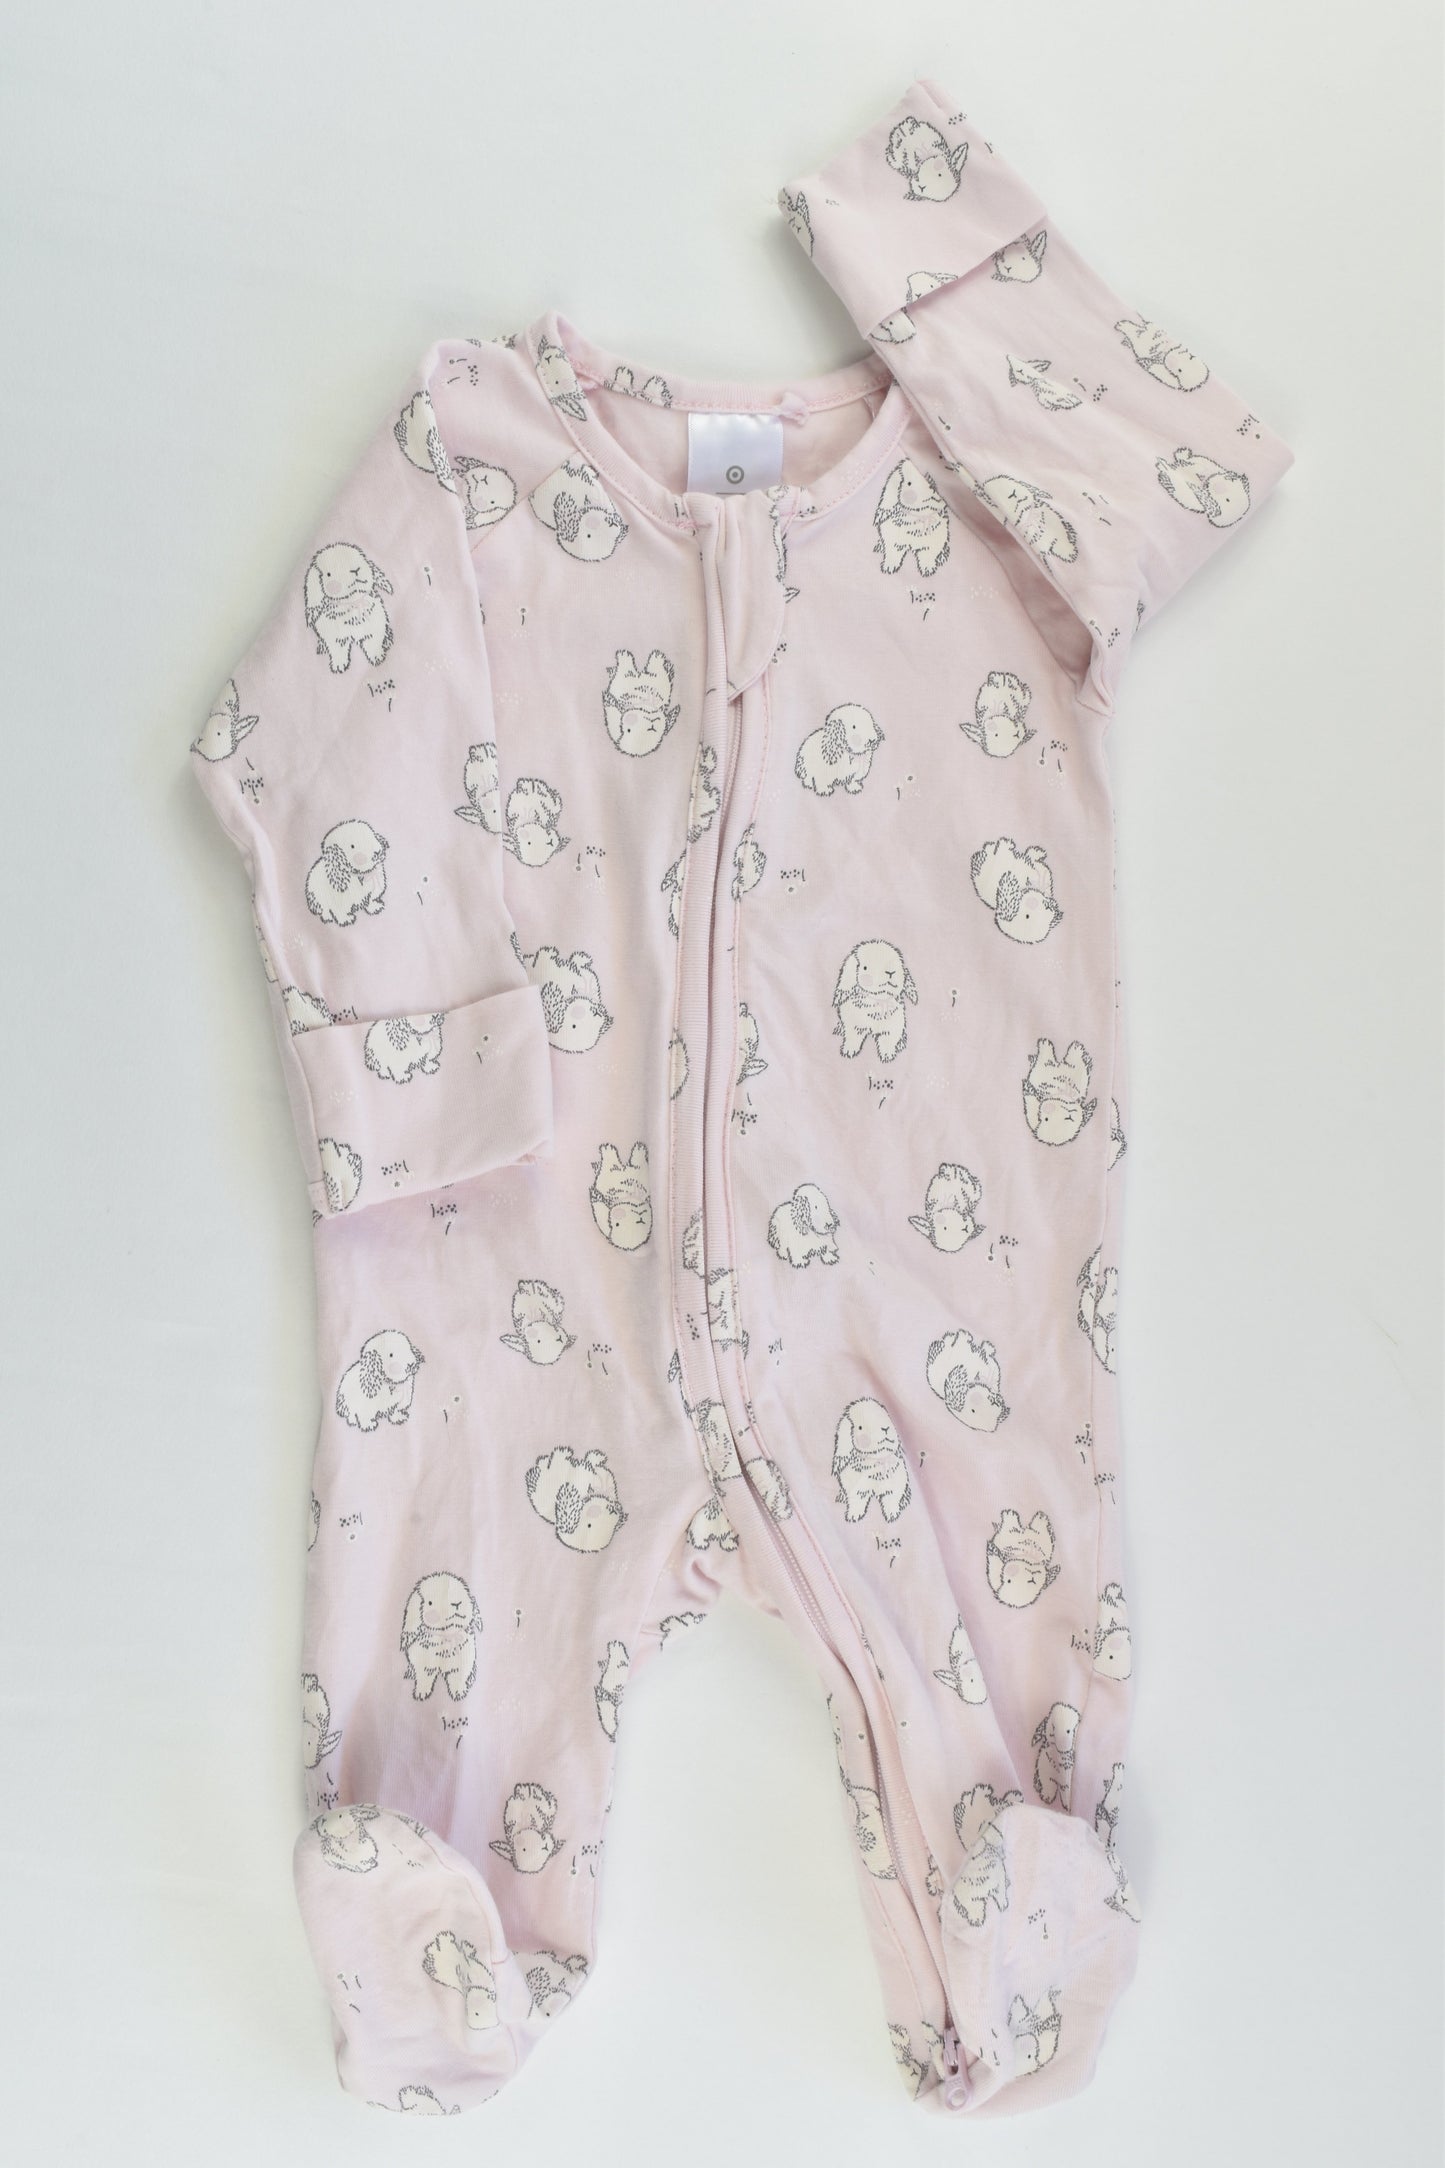 Target Size 000 (0-3 months) Bunnies Footed Romper